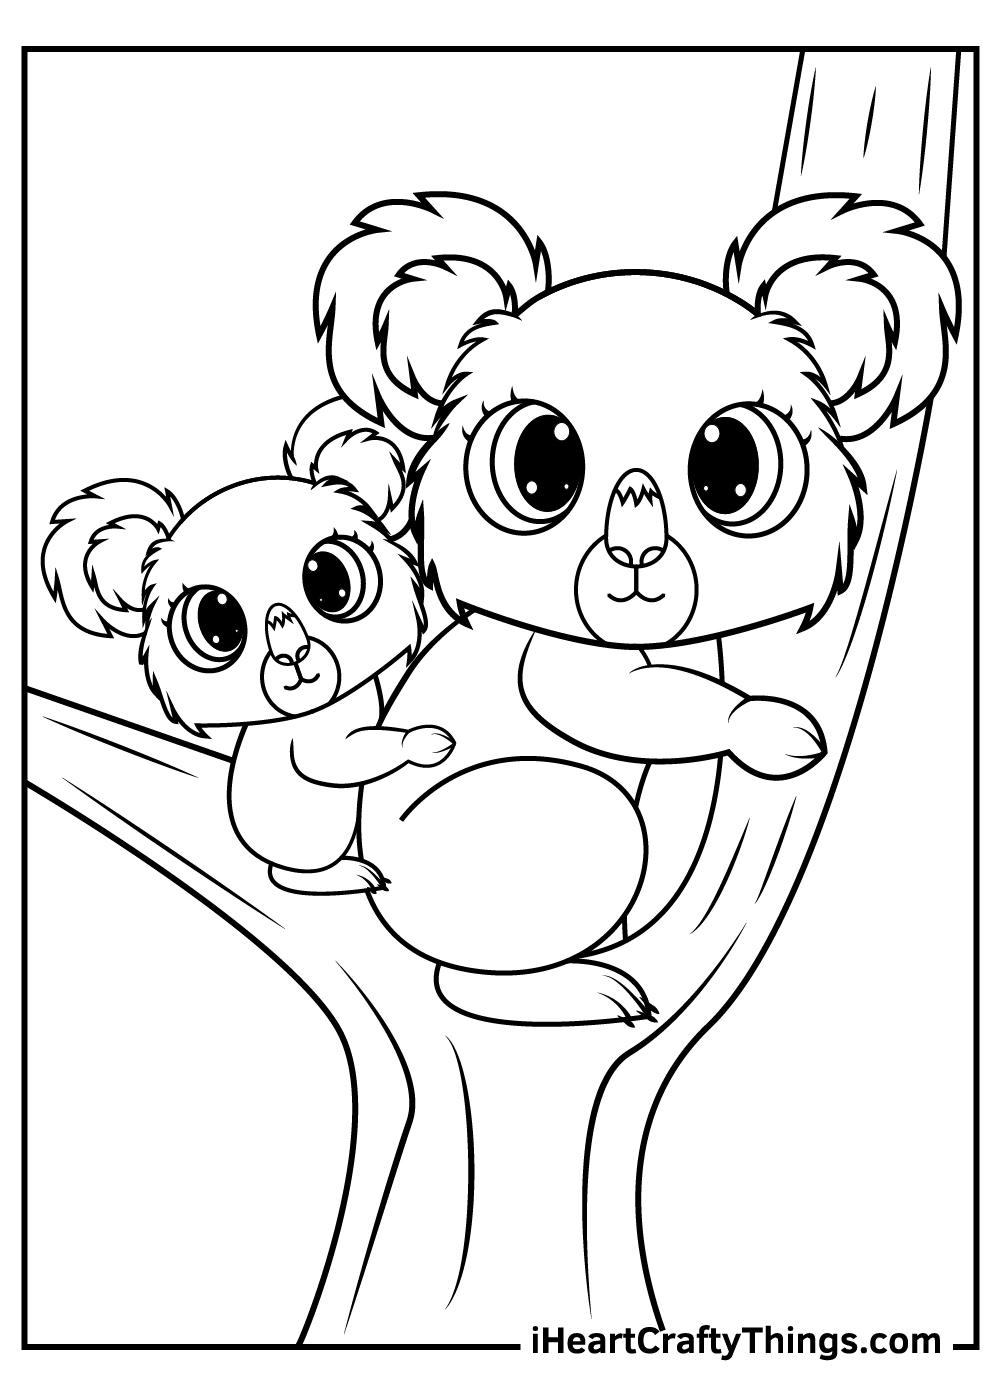 Koalas Coloring Pages Updated 2021 